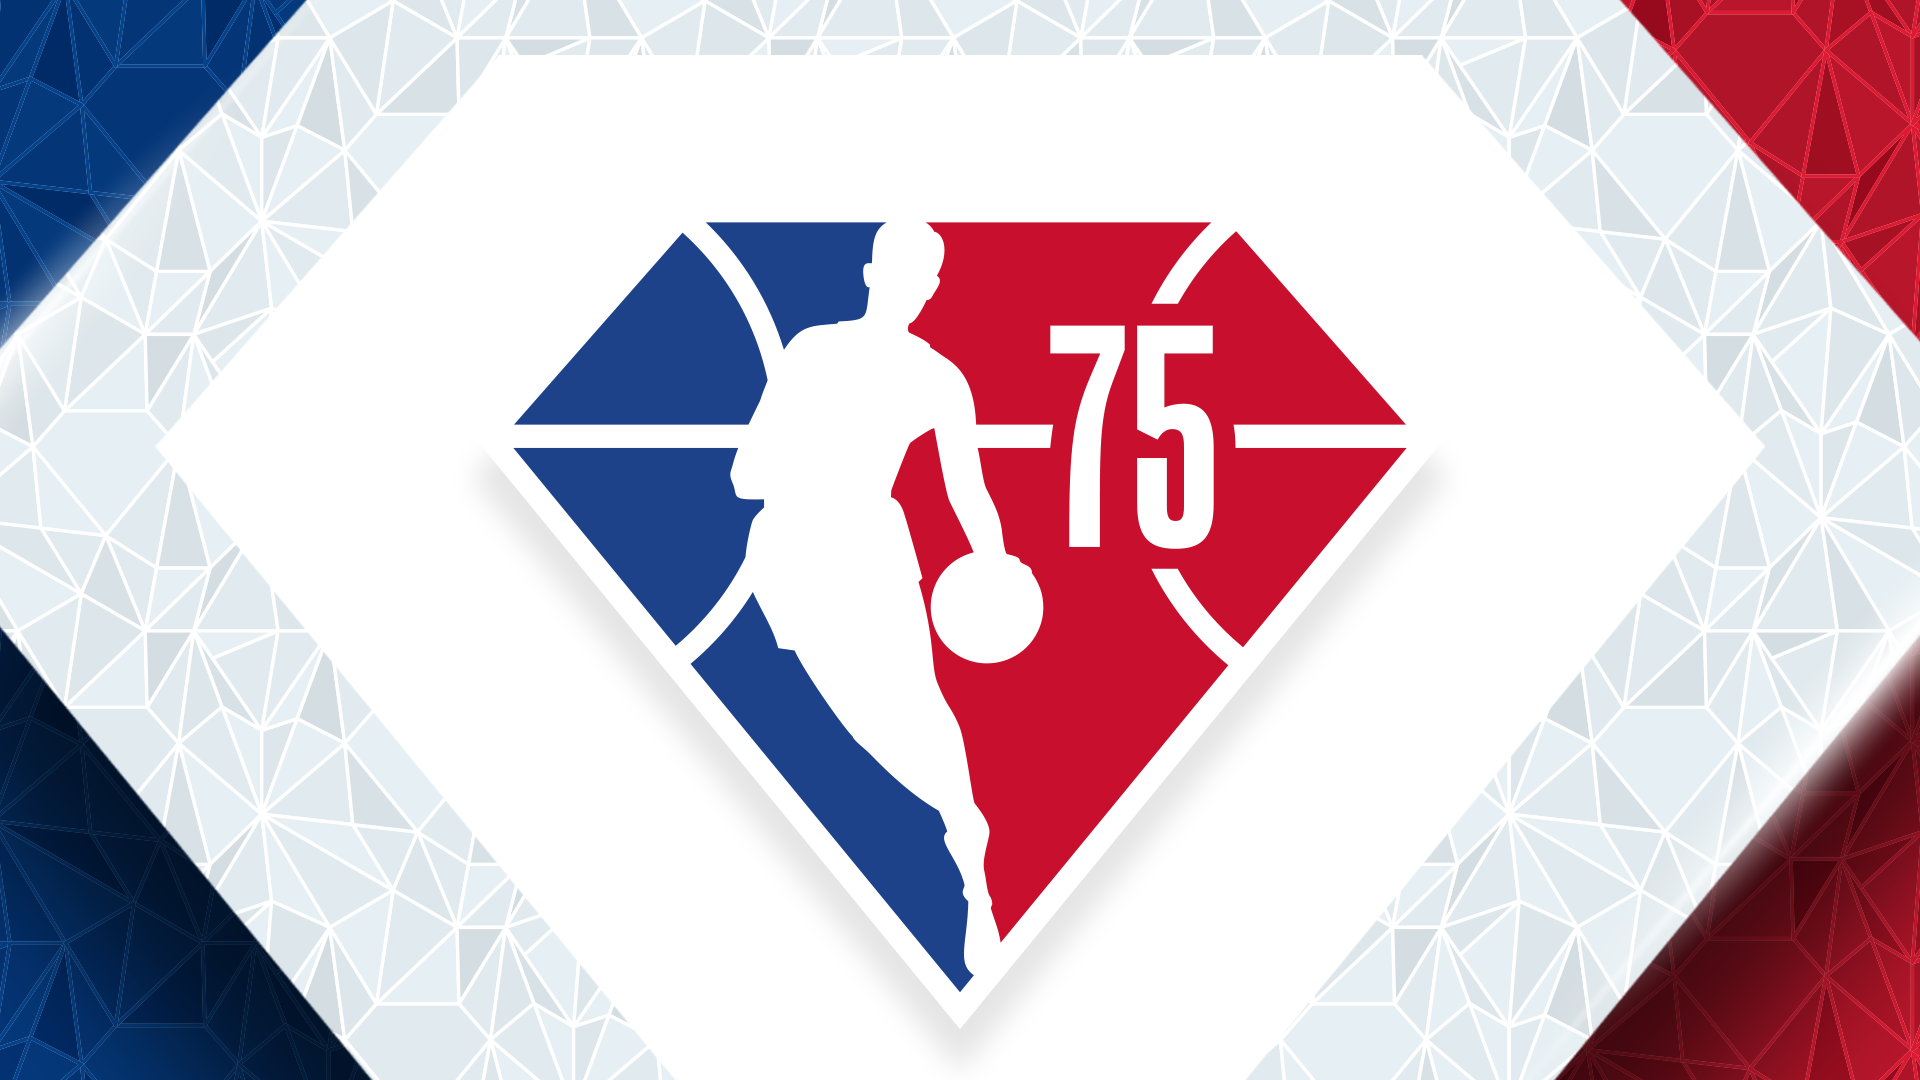 NBA to name 75 greatest players during 75th anniversary season celebration